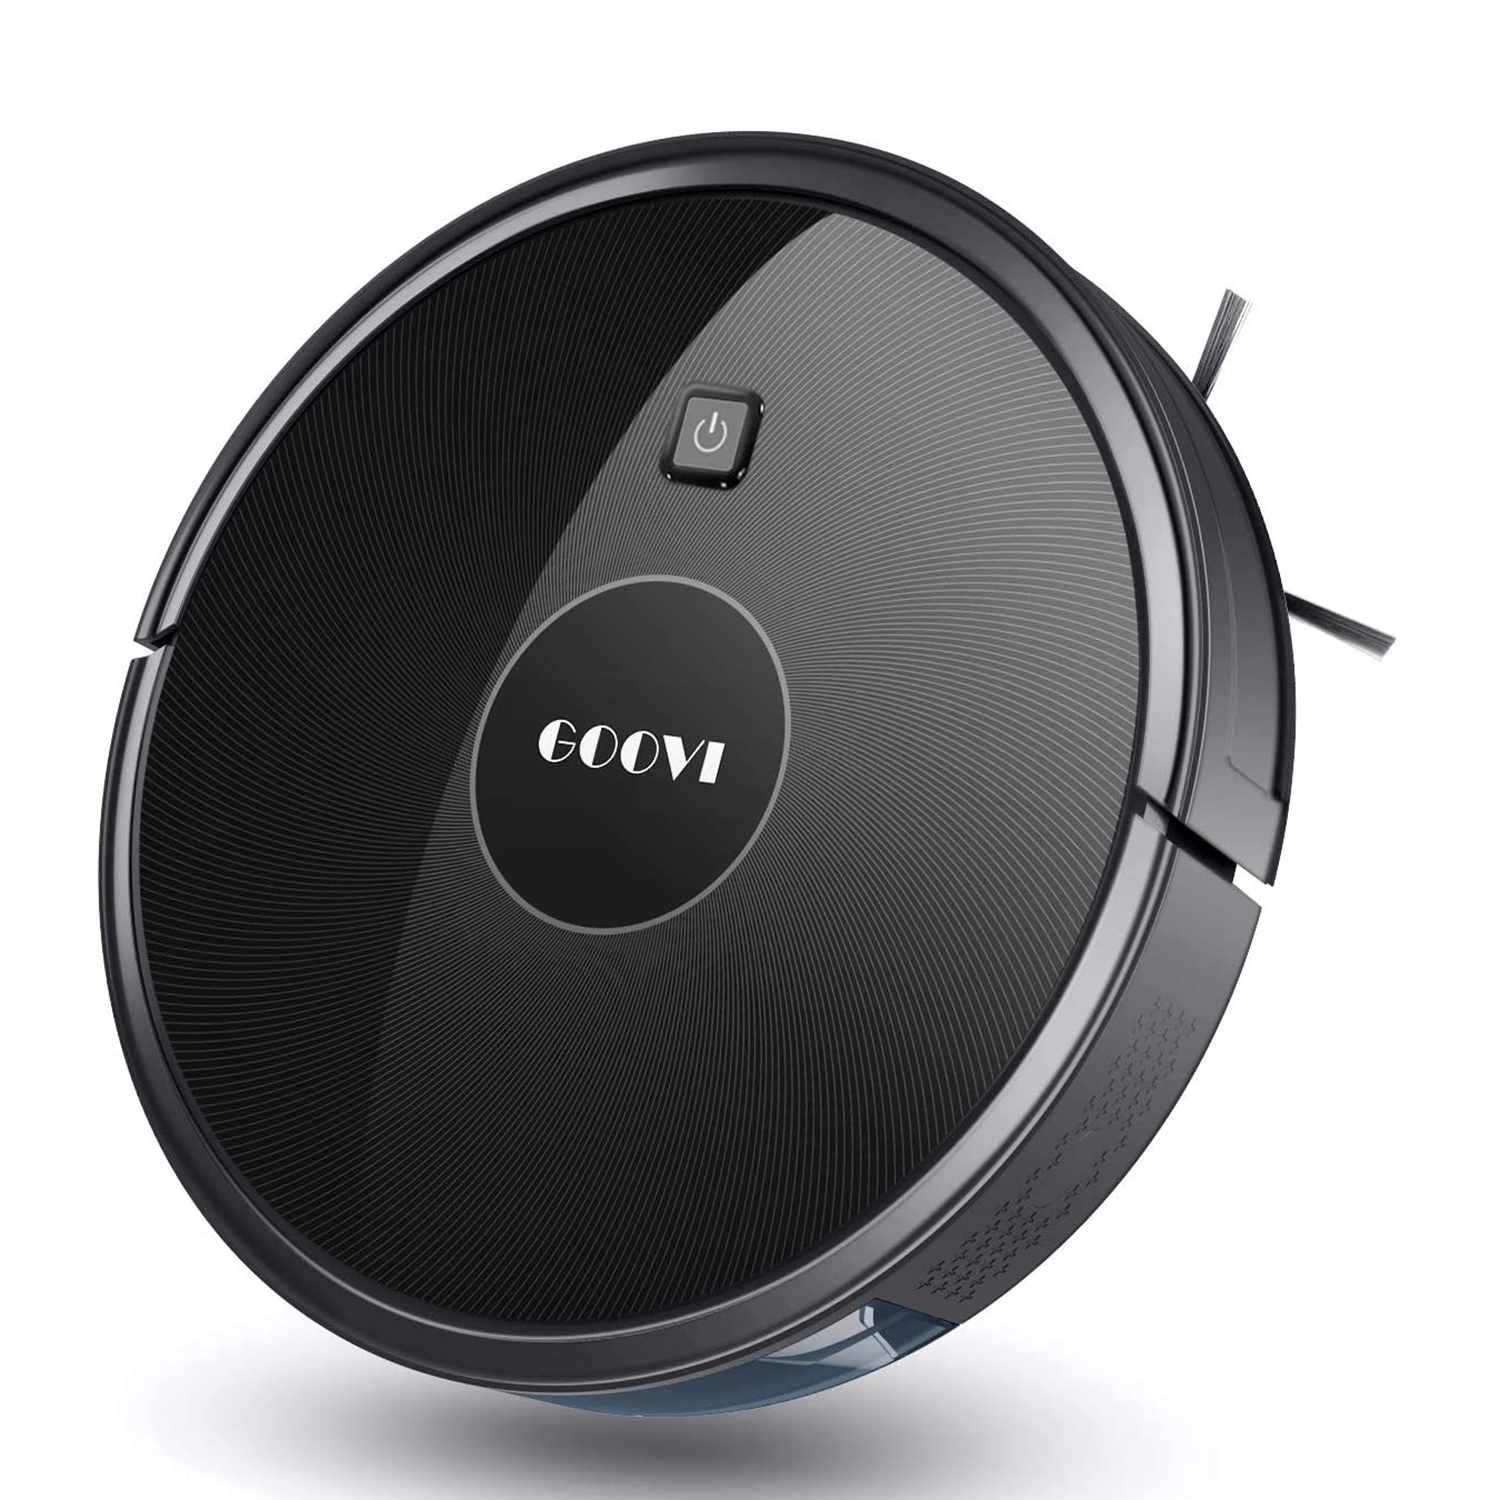 Orrhomi Robot Vacuum Cleaner 2-in-1 Robot Vacuum and Mop,1500Pa High Suction,360° Intelligent Steering,No Wi-Fi Need,Ideal for Pet Hair Hard Floor and Carpet…